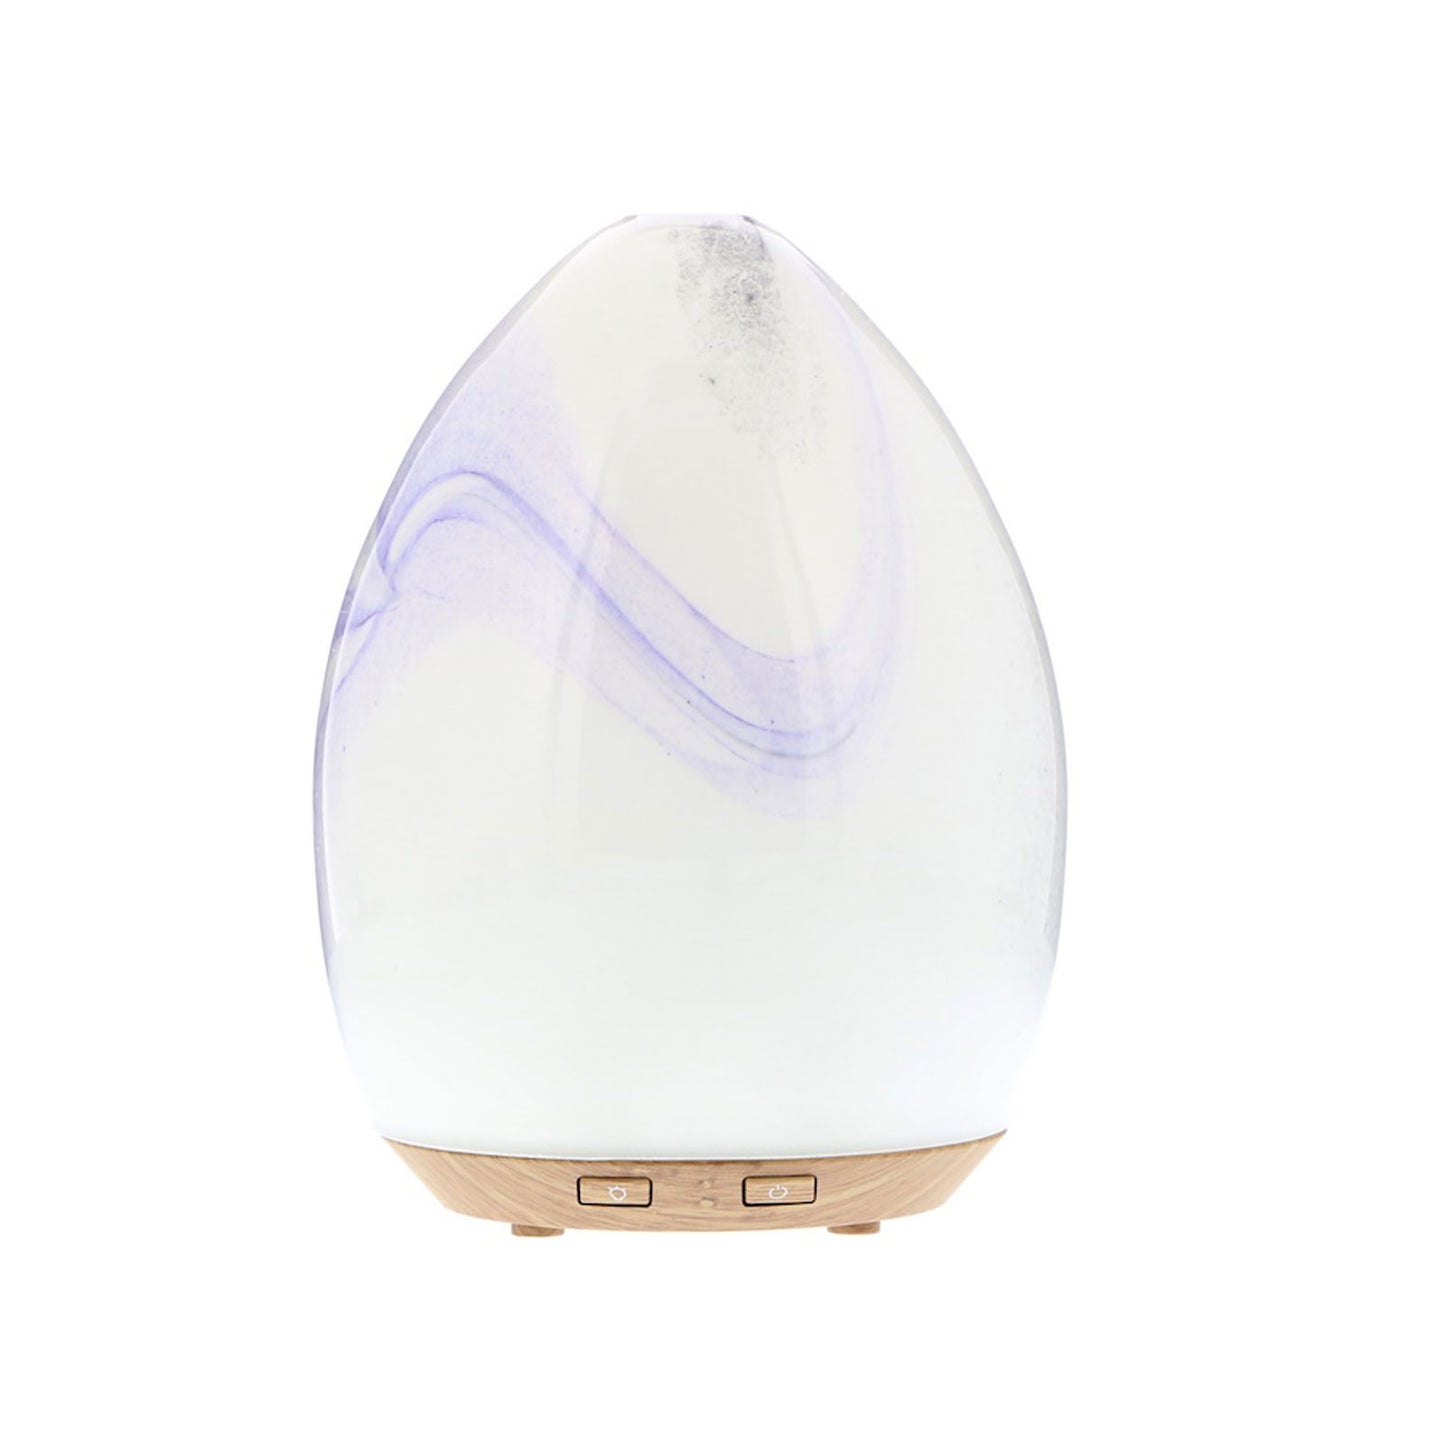 NOW Essential Oils, Ultrasonic USB Glass Swirl Aromatherapy Oil Diffuser, Extremely Quiet, Heat Free and Easy to Clean, Color Changing LED Diffuser - Bloom Concept